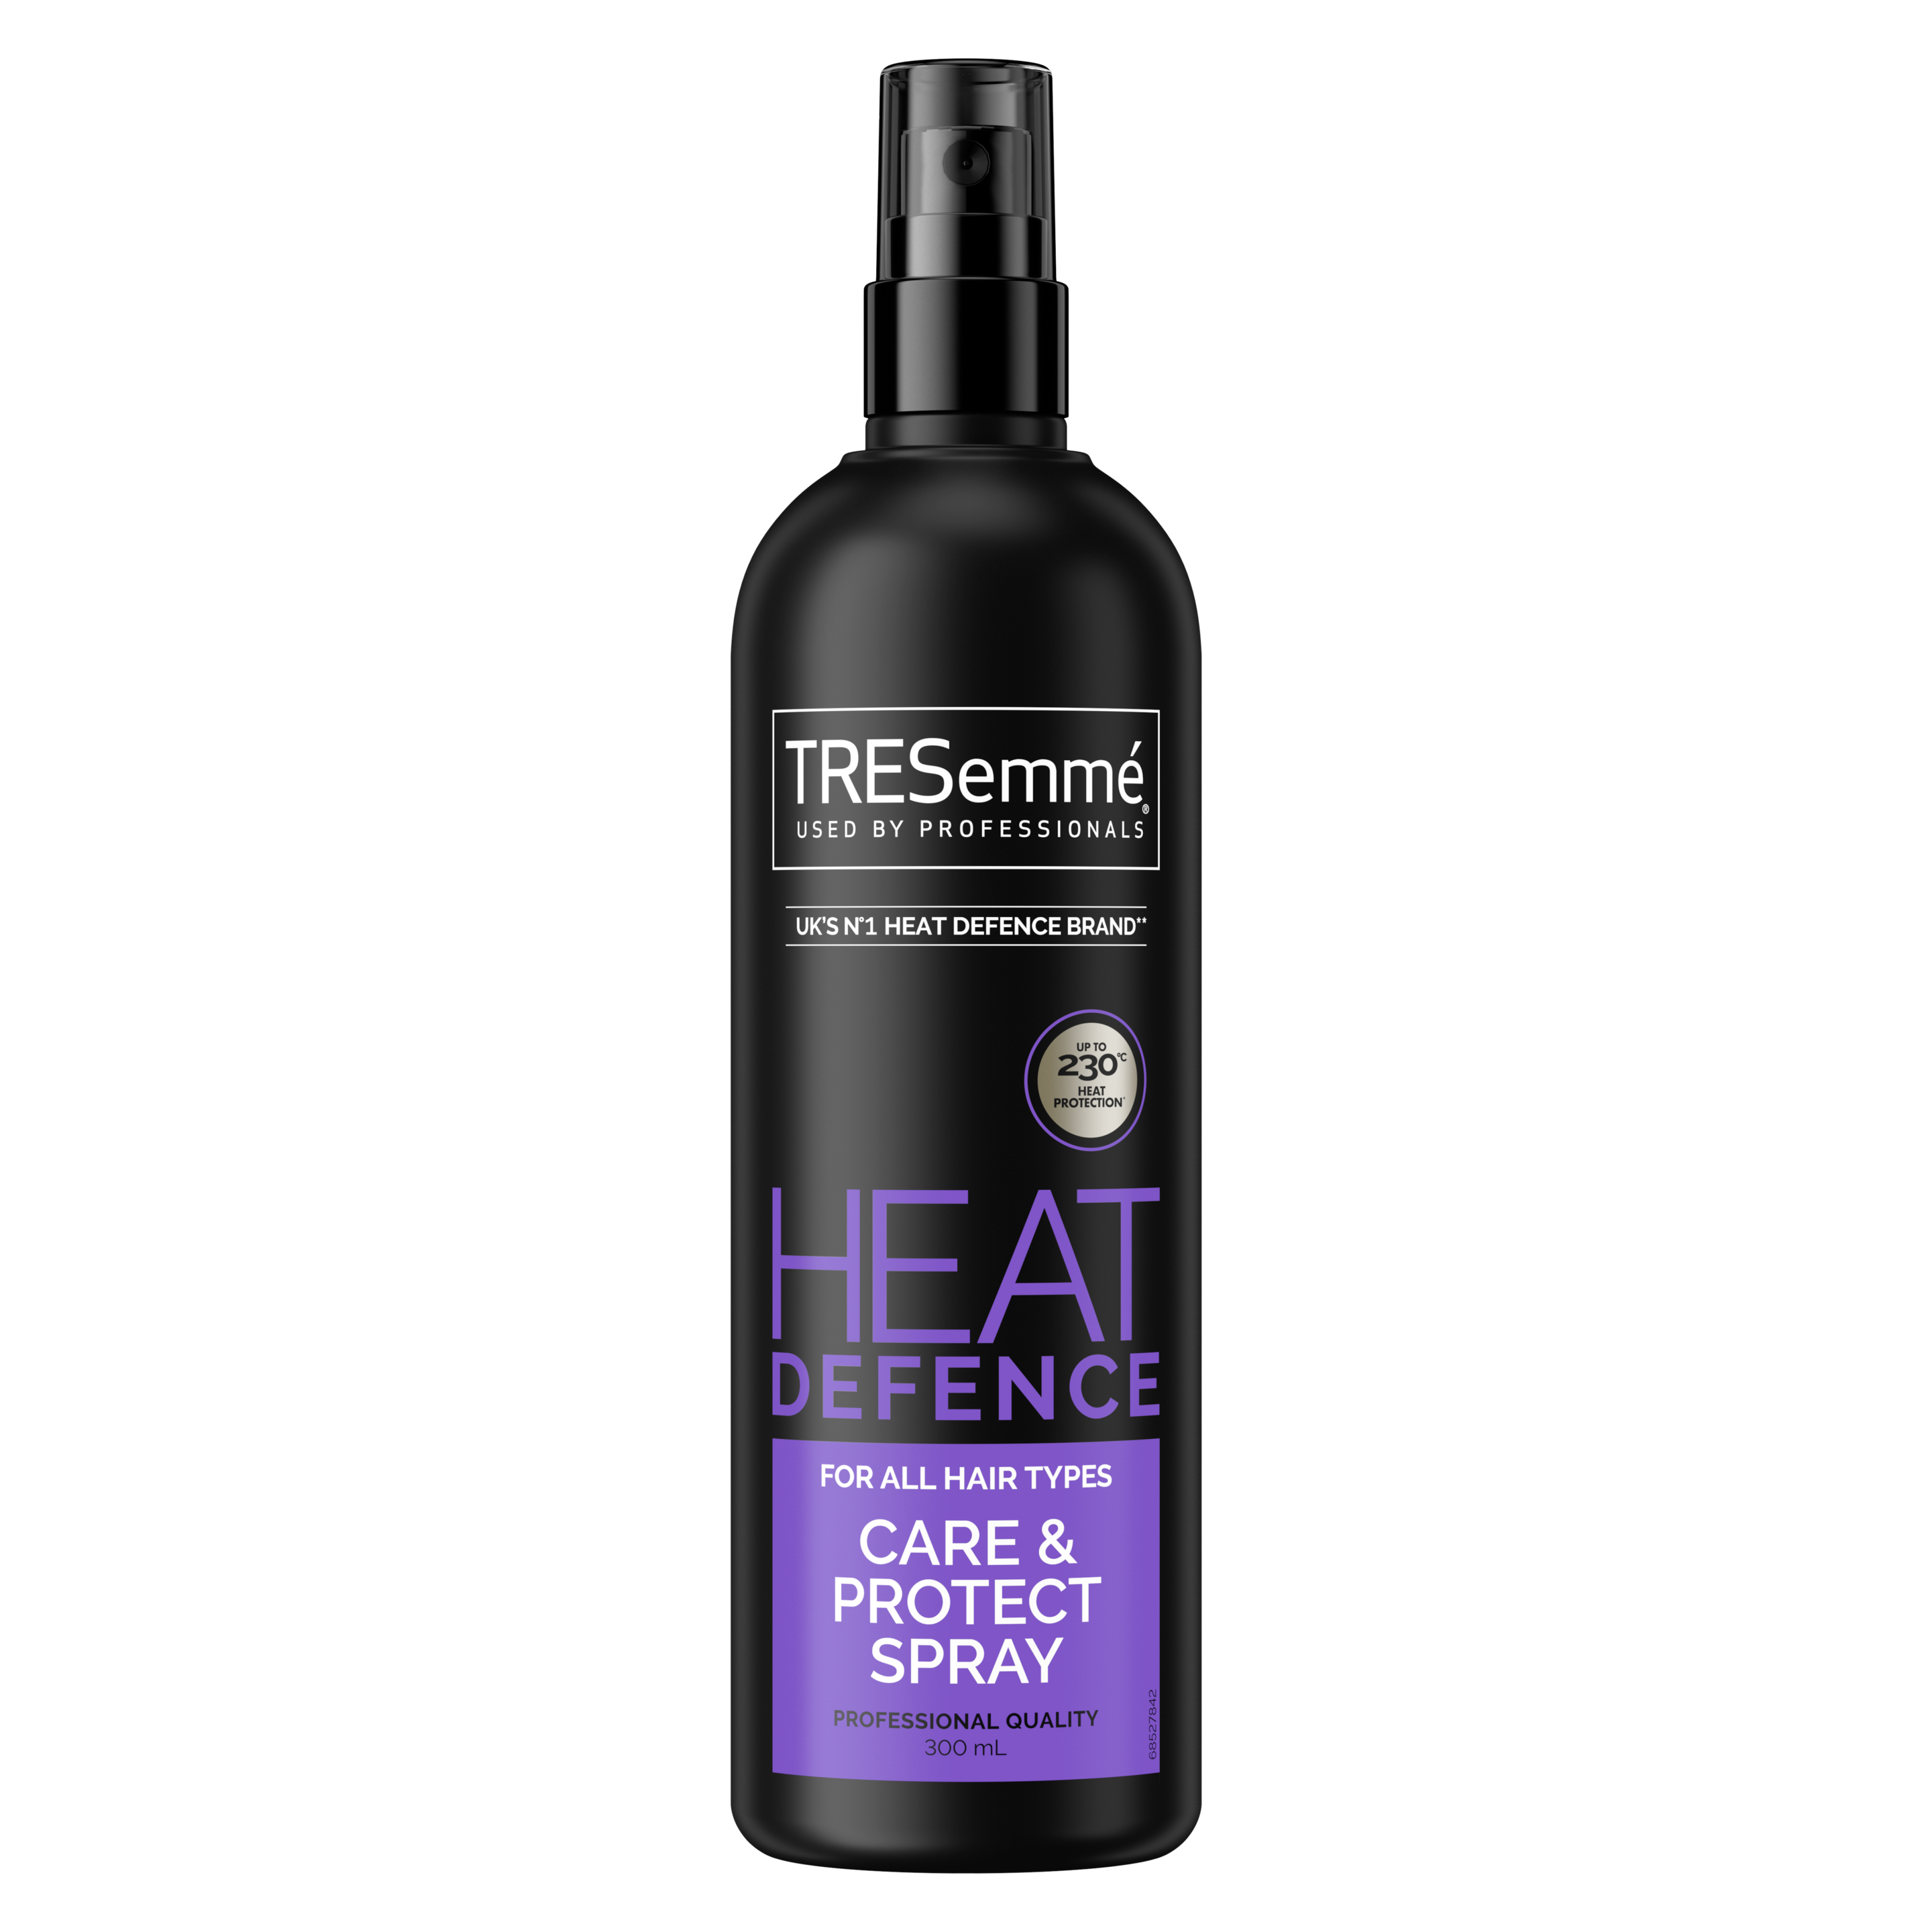 A 300ml bottle of TRESemmé Heat Defence Spray front of pack image